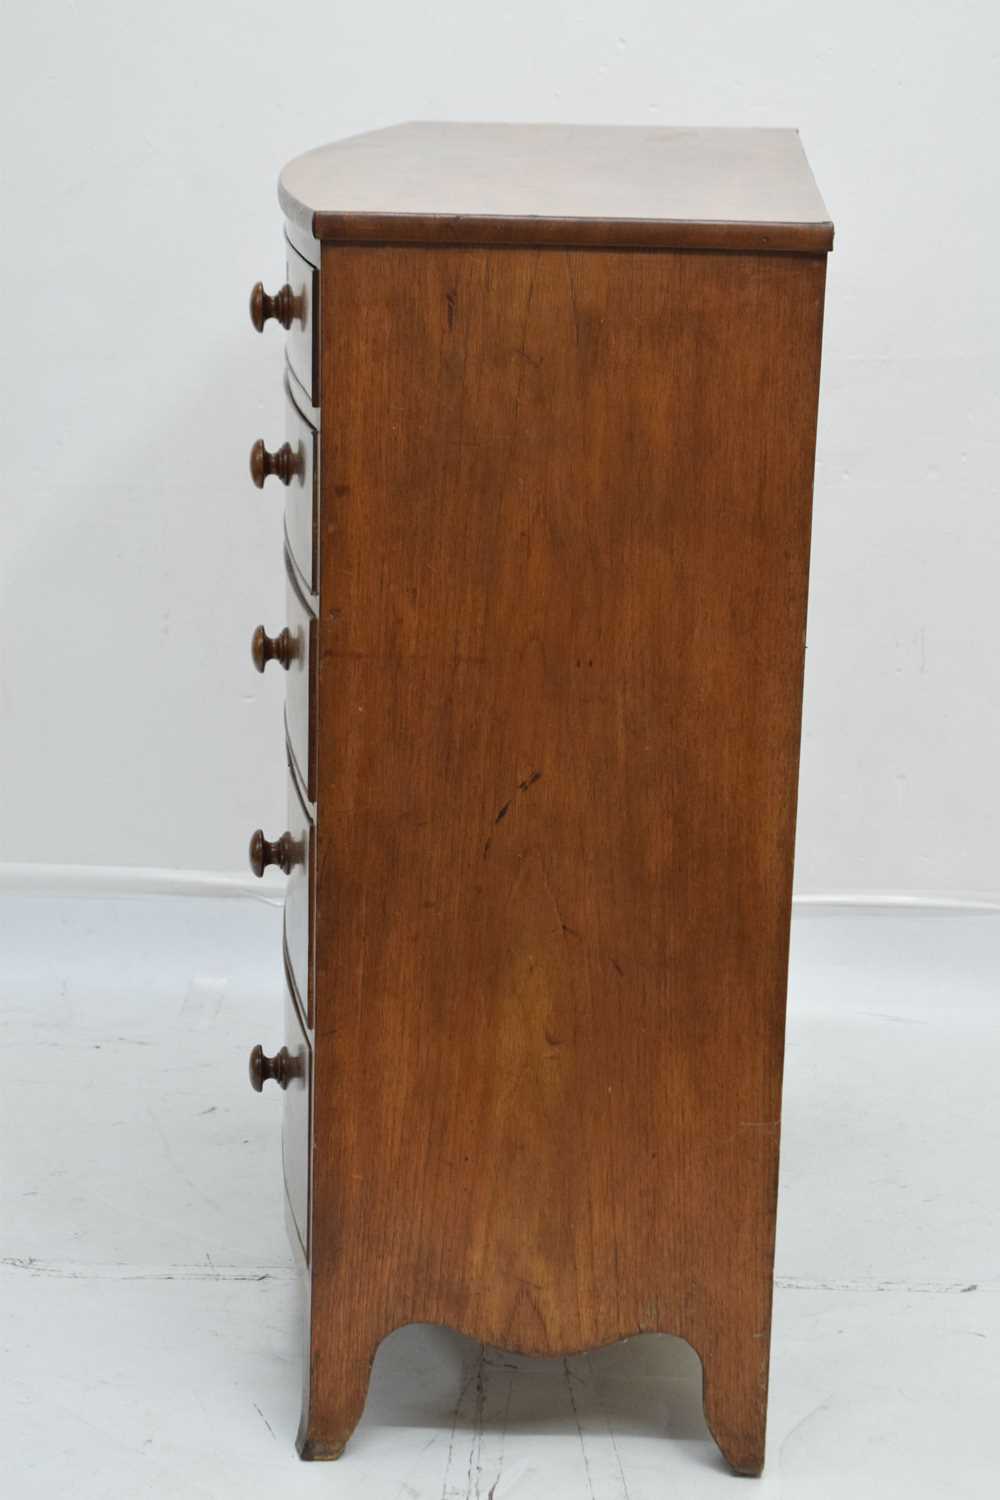 Early 19th century mahogany bowfront chest of drawers - Image 6 of 9